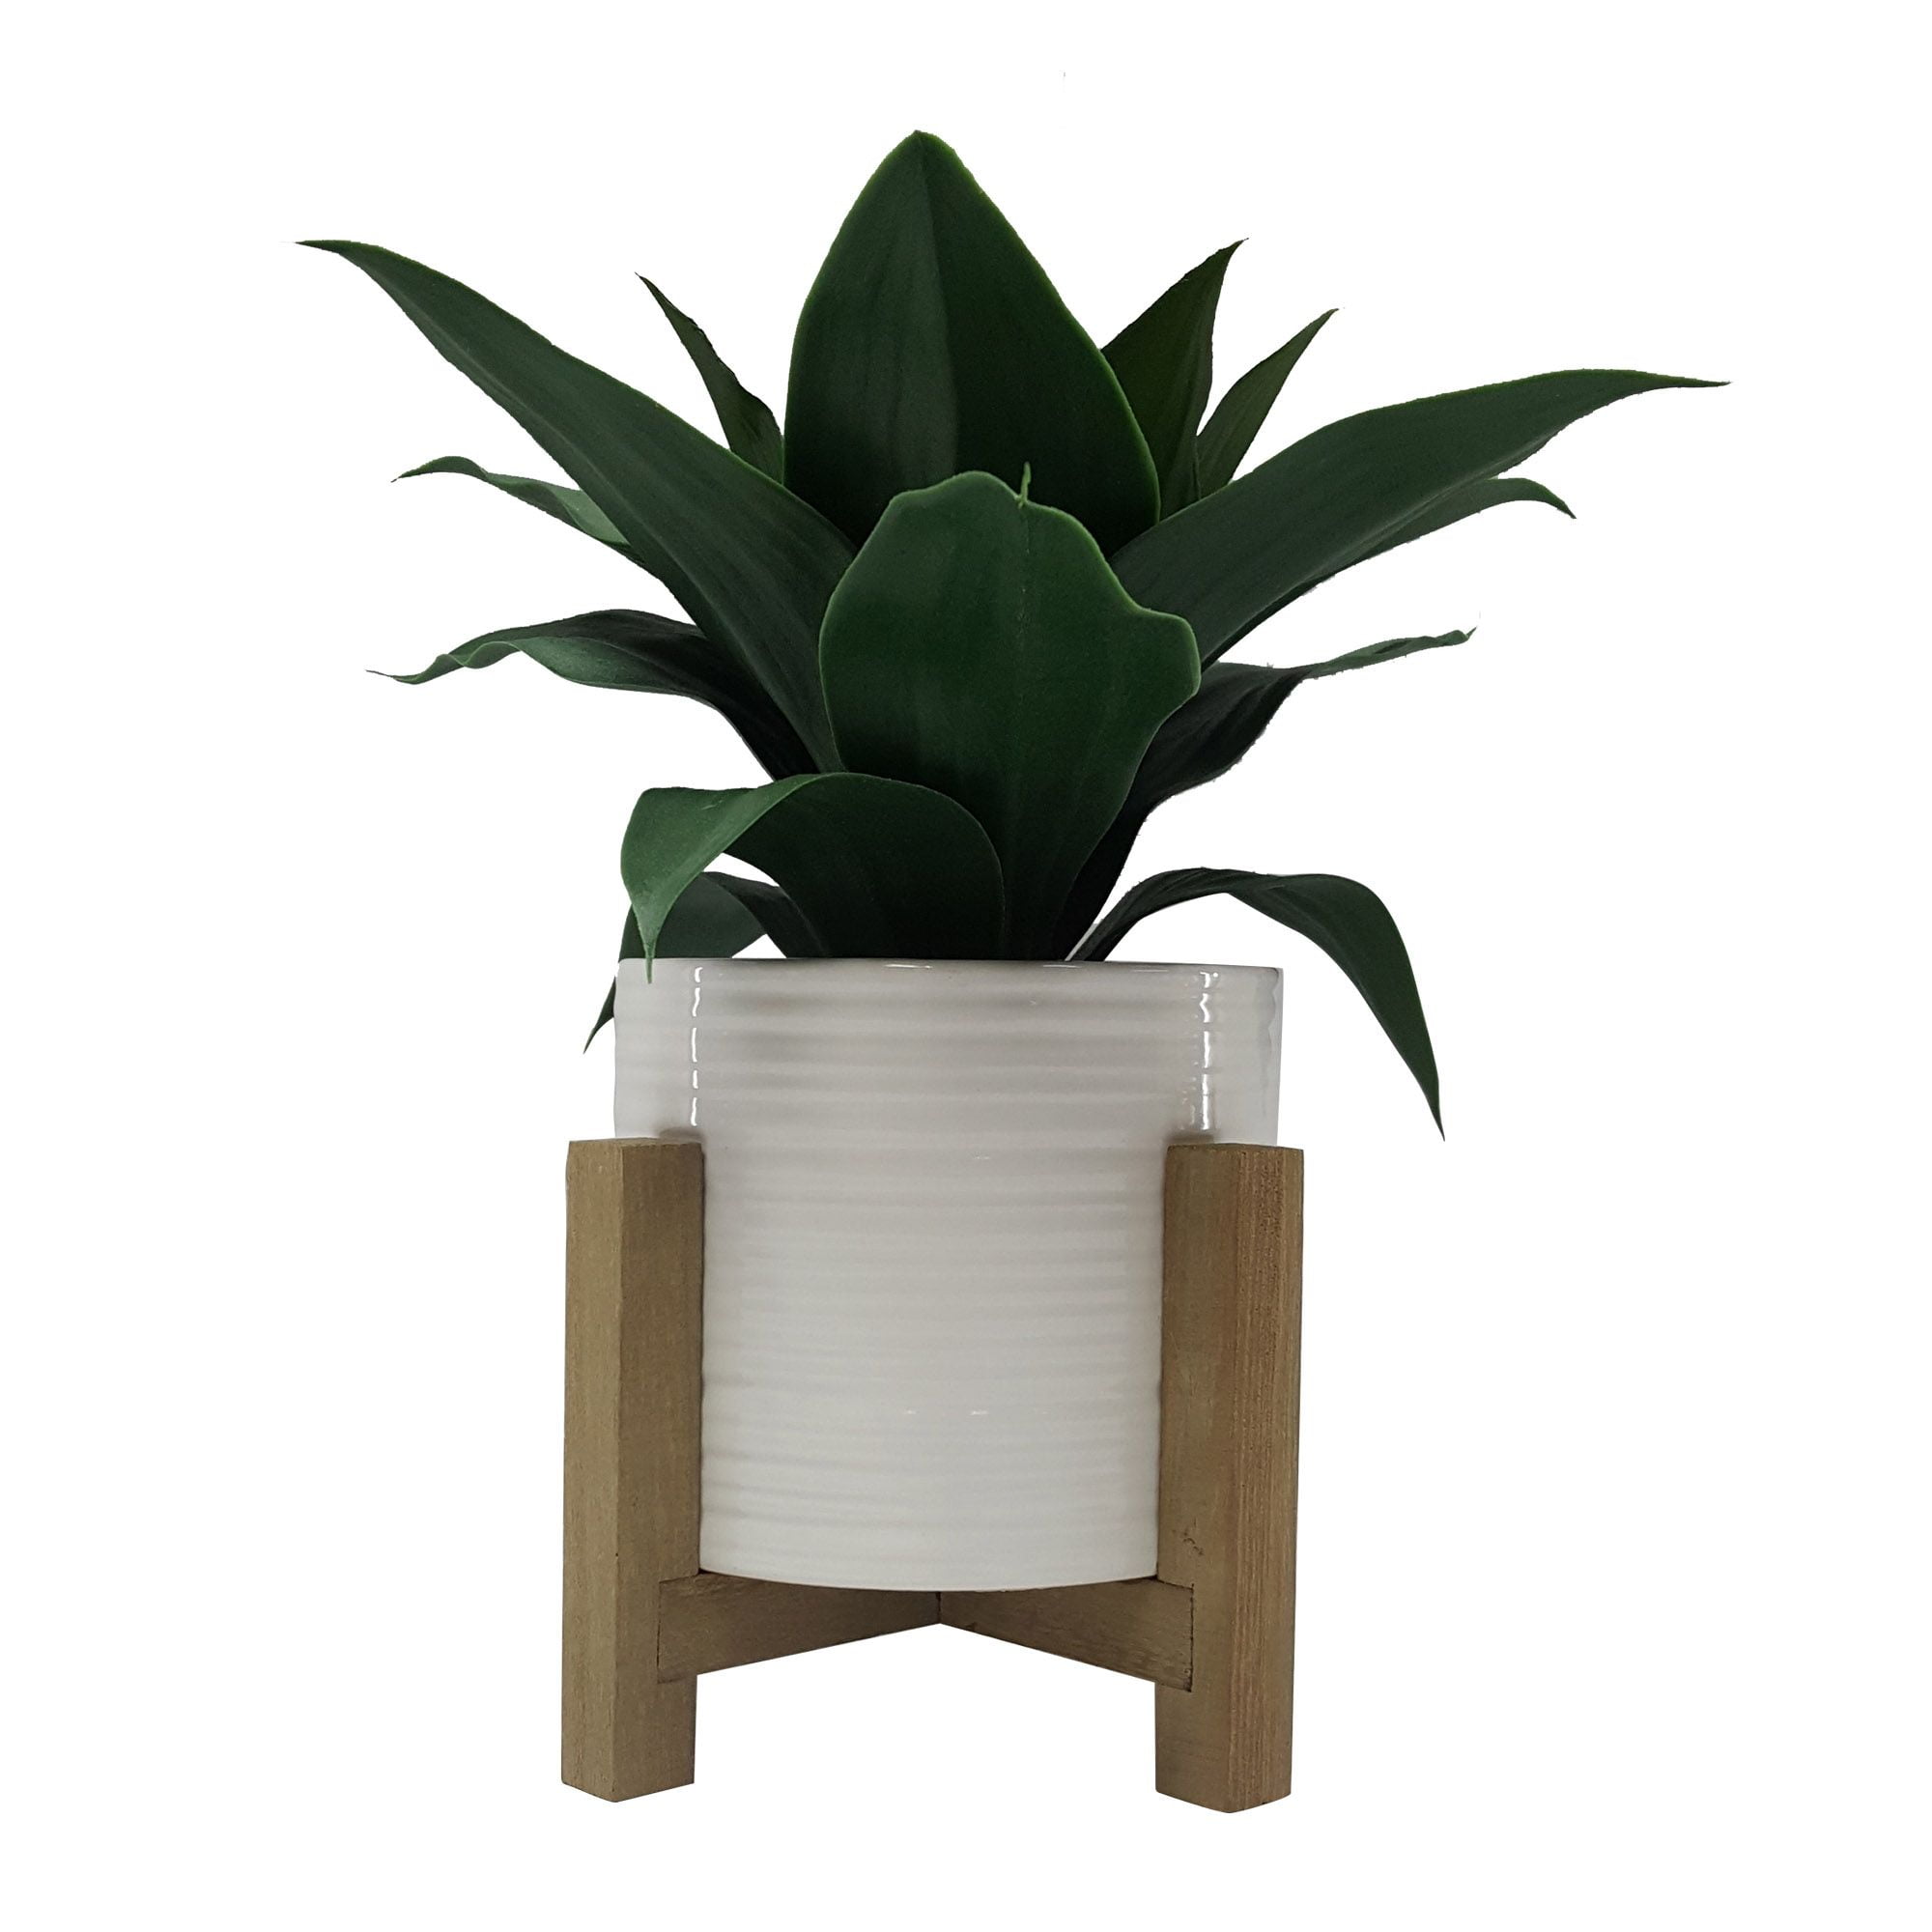 Details about   Fake Agave Plant w/ Planter Pot Green Floral Decor Plant Garden No Watering Tree 